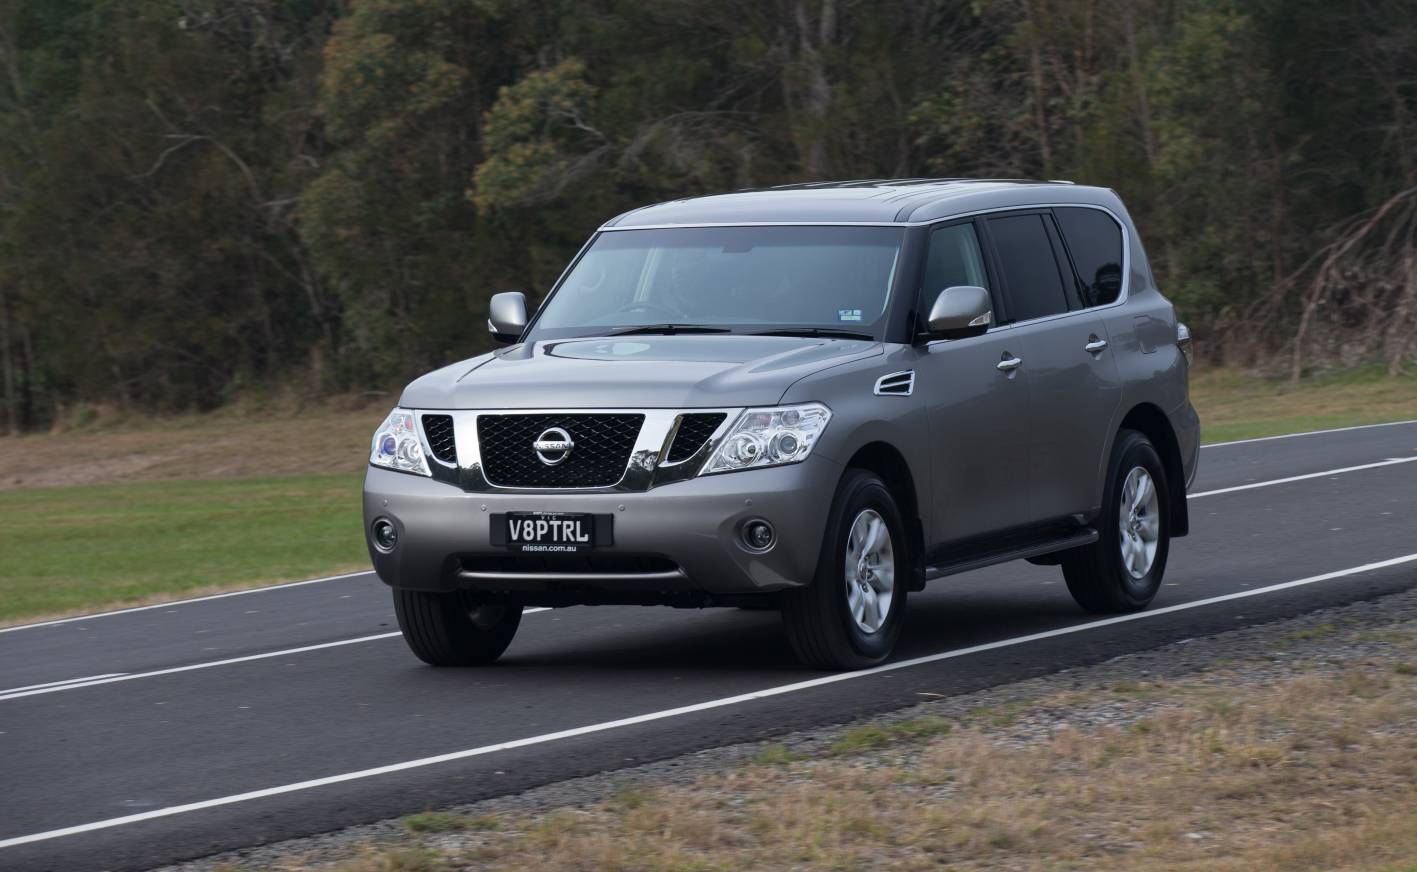 Price drop and more gear for 2015 Nissan Patrol - ForceGT.com1417 x 872